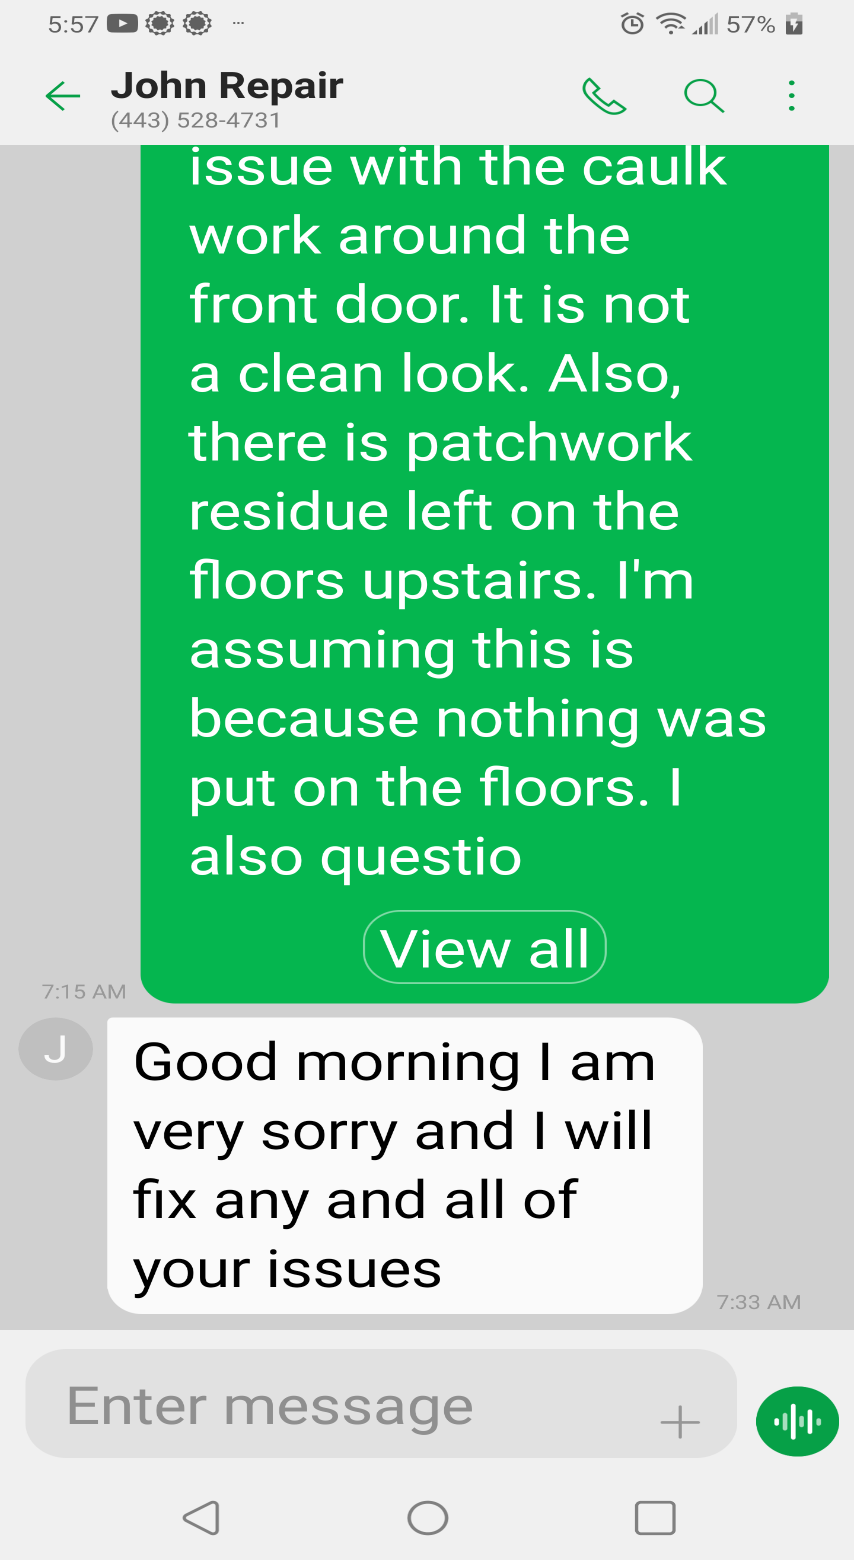 text message notifying the owner of the issues